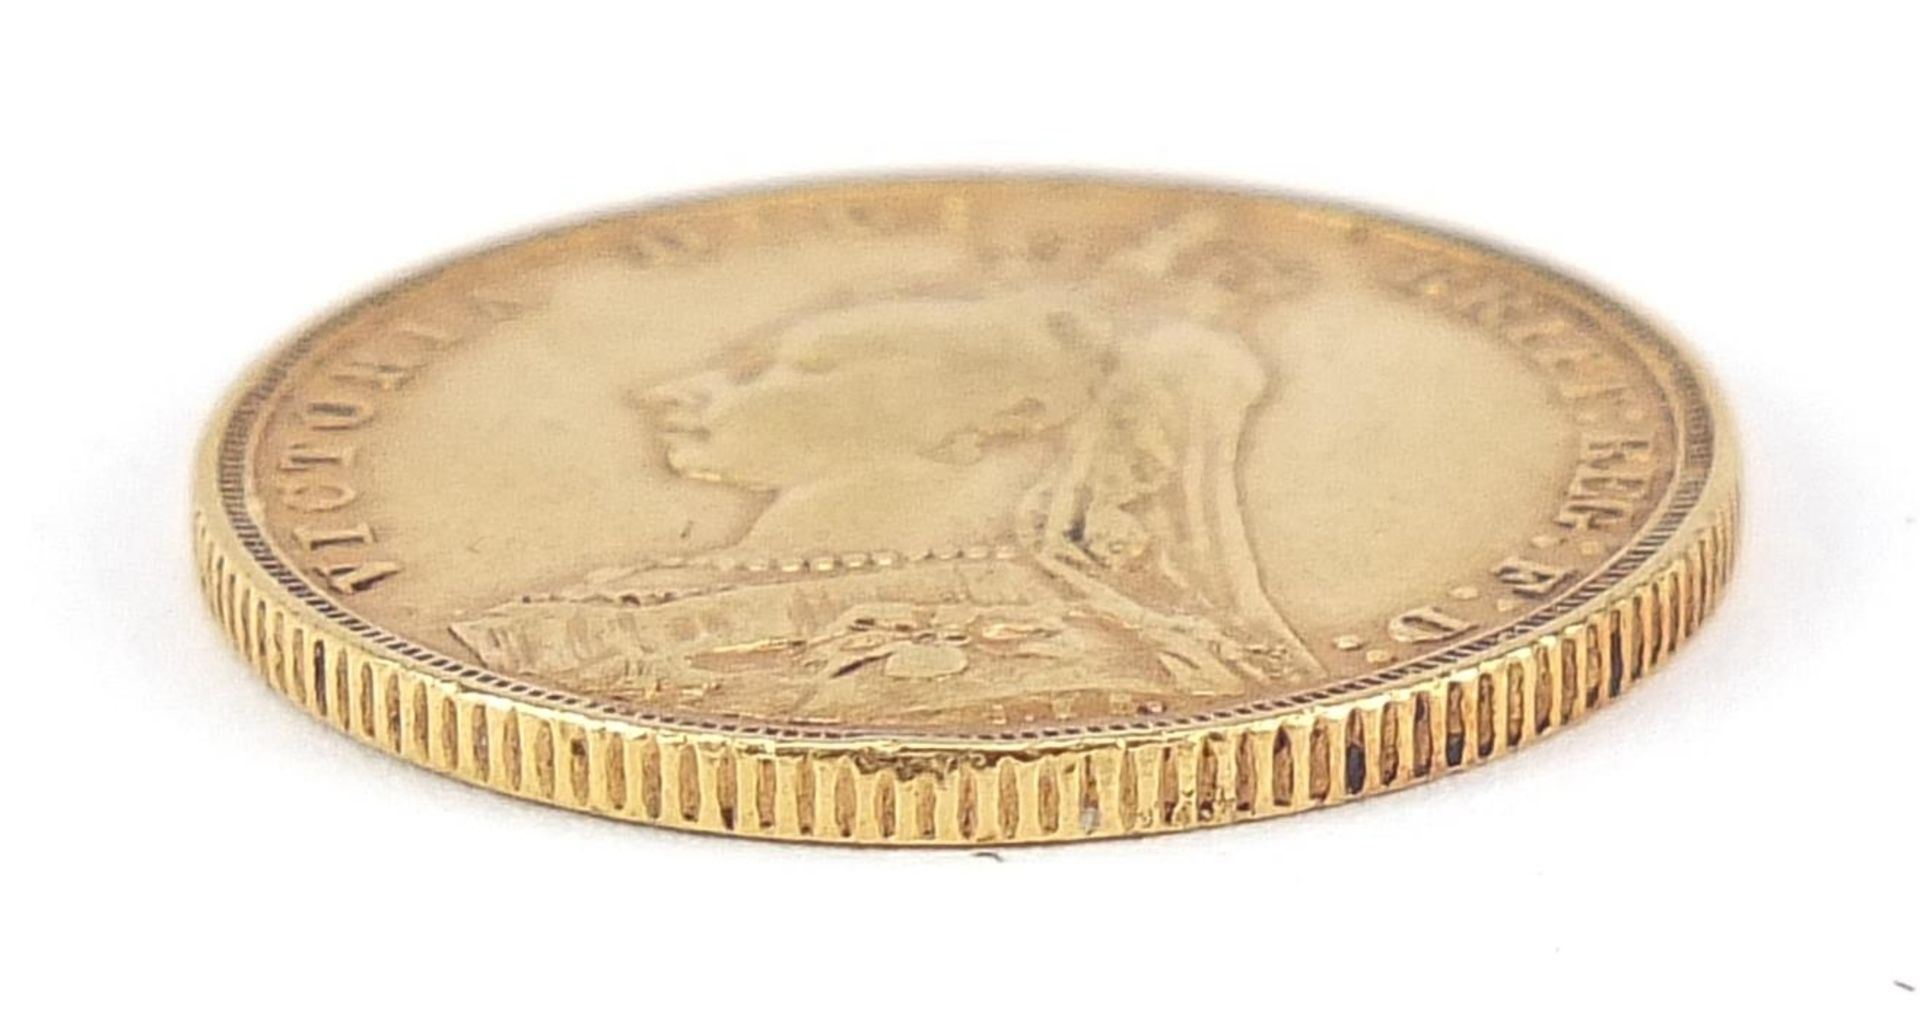 Queen Victoria Jubilee head 1892 gold sovereign - this lot is sold without buyer's premium - Image 3 of 3